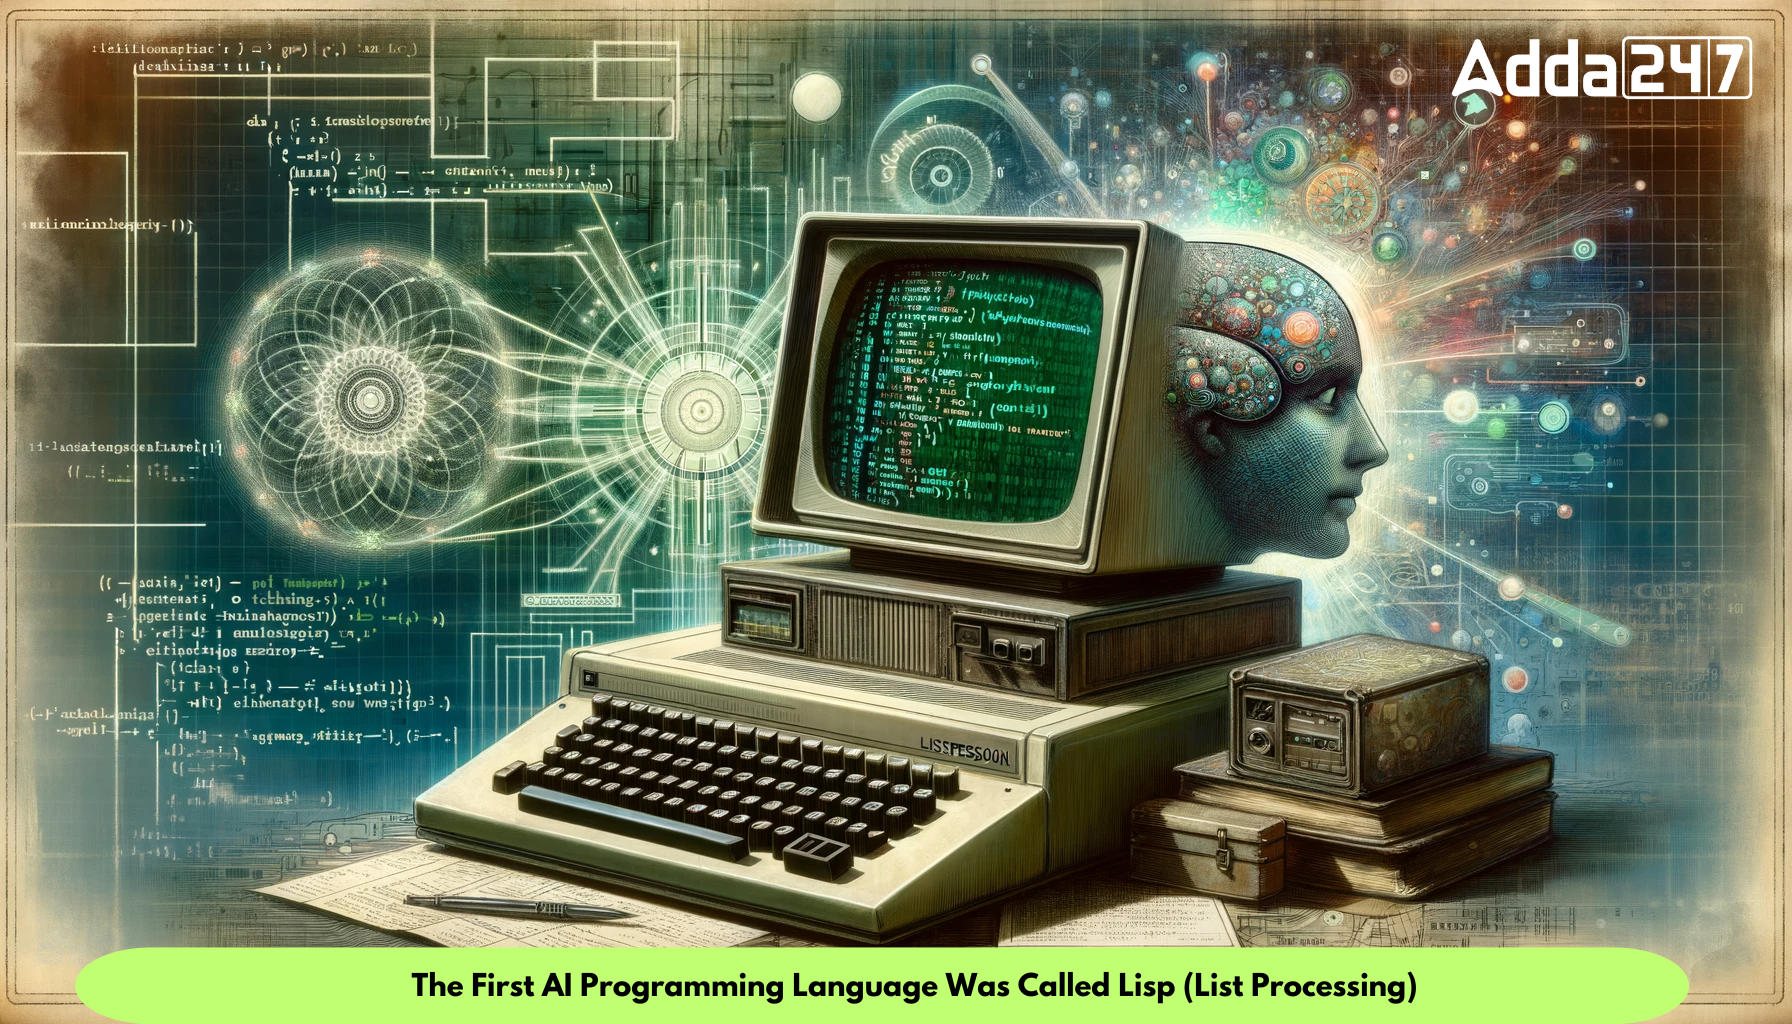 The First AI Programming Language Was Called Lisp (List Processing)